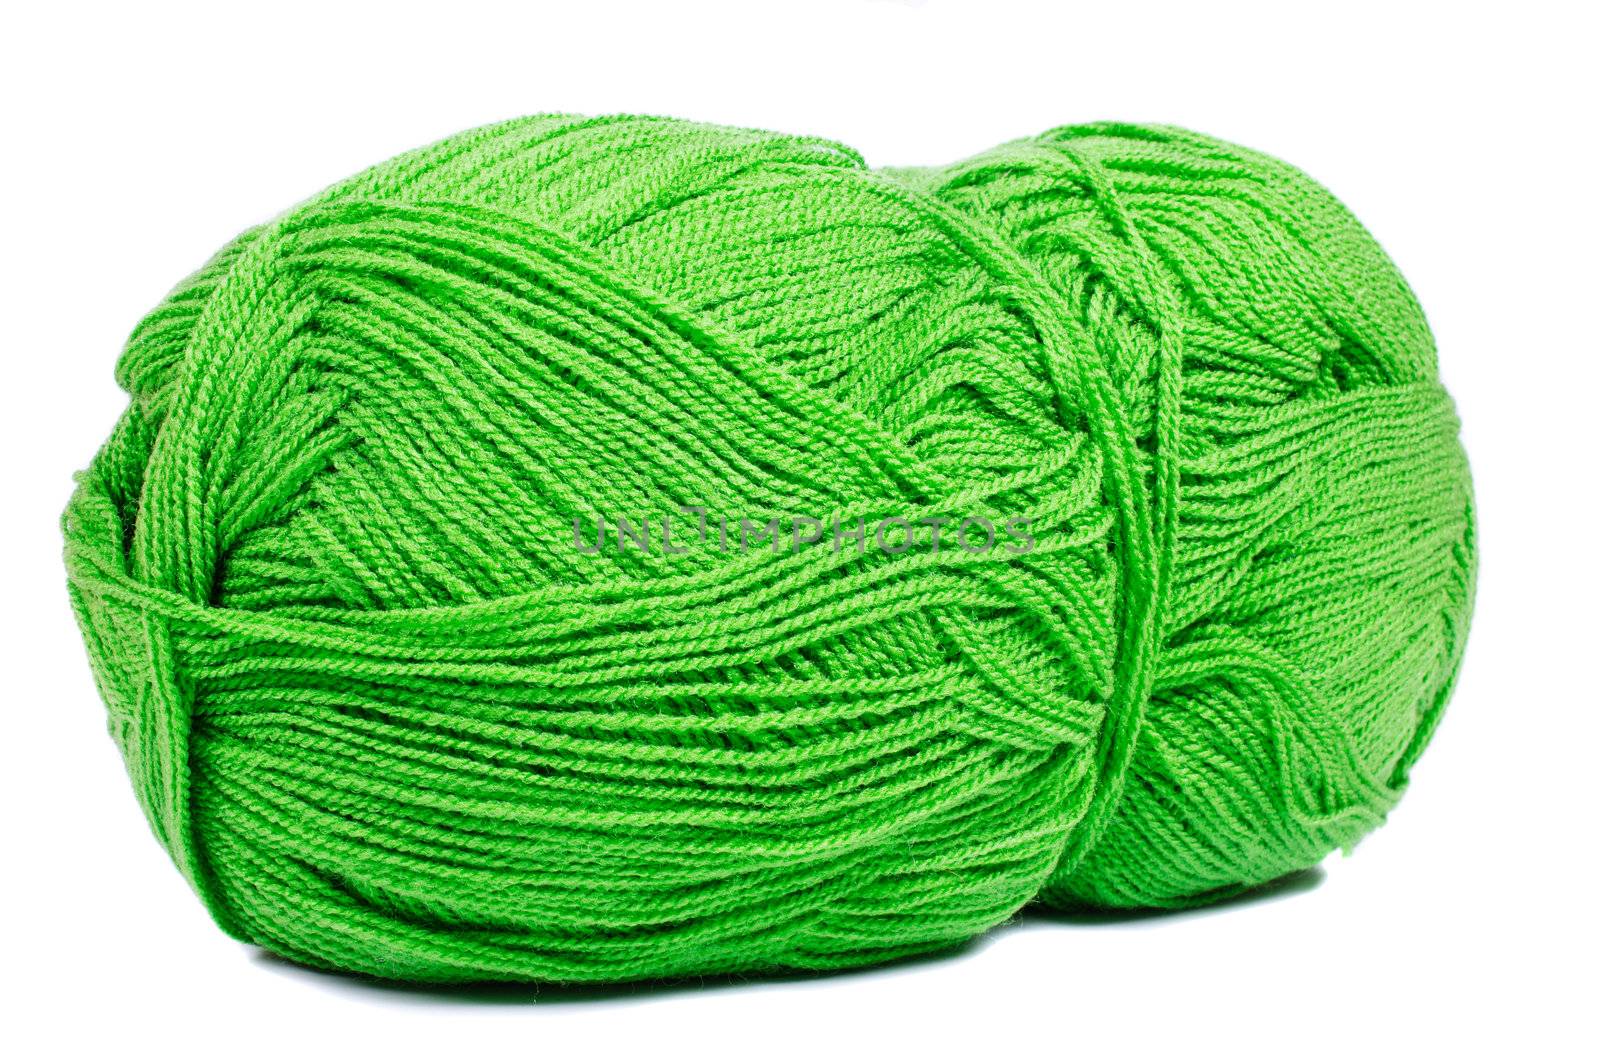 Green thread ball for knitting isolated